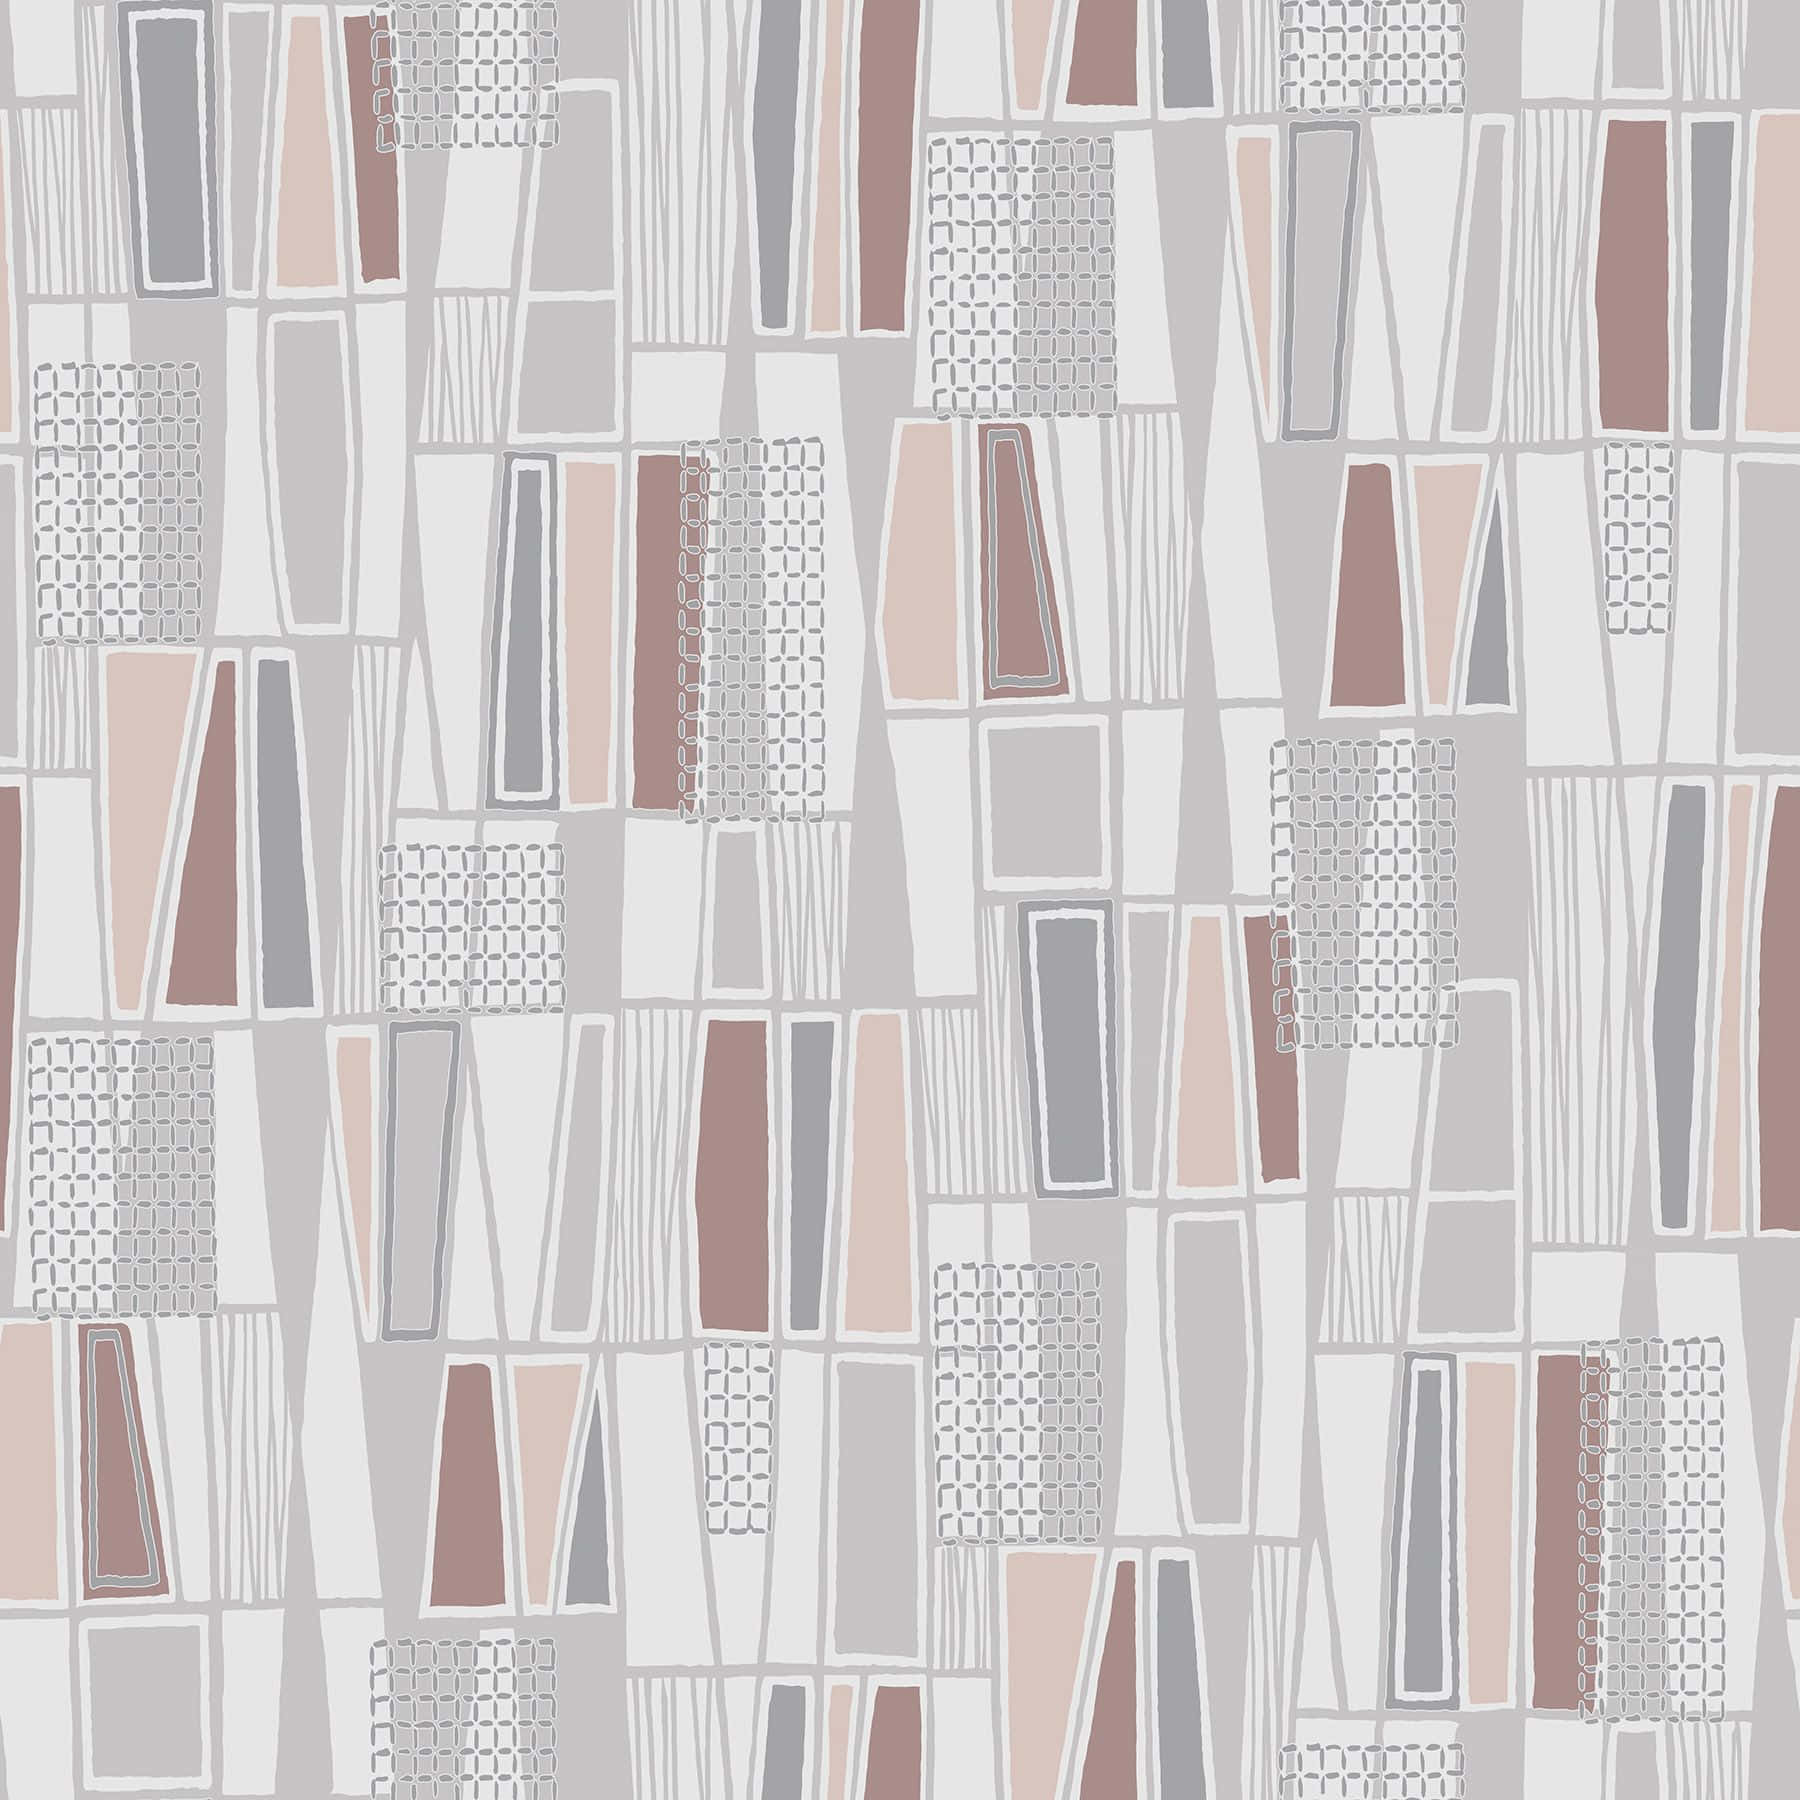 Iconic architecture of the iconic era, Modernism Wallpaper